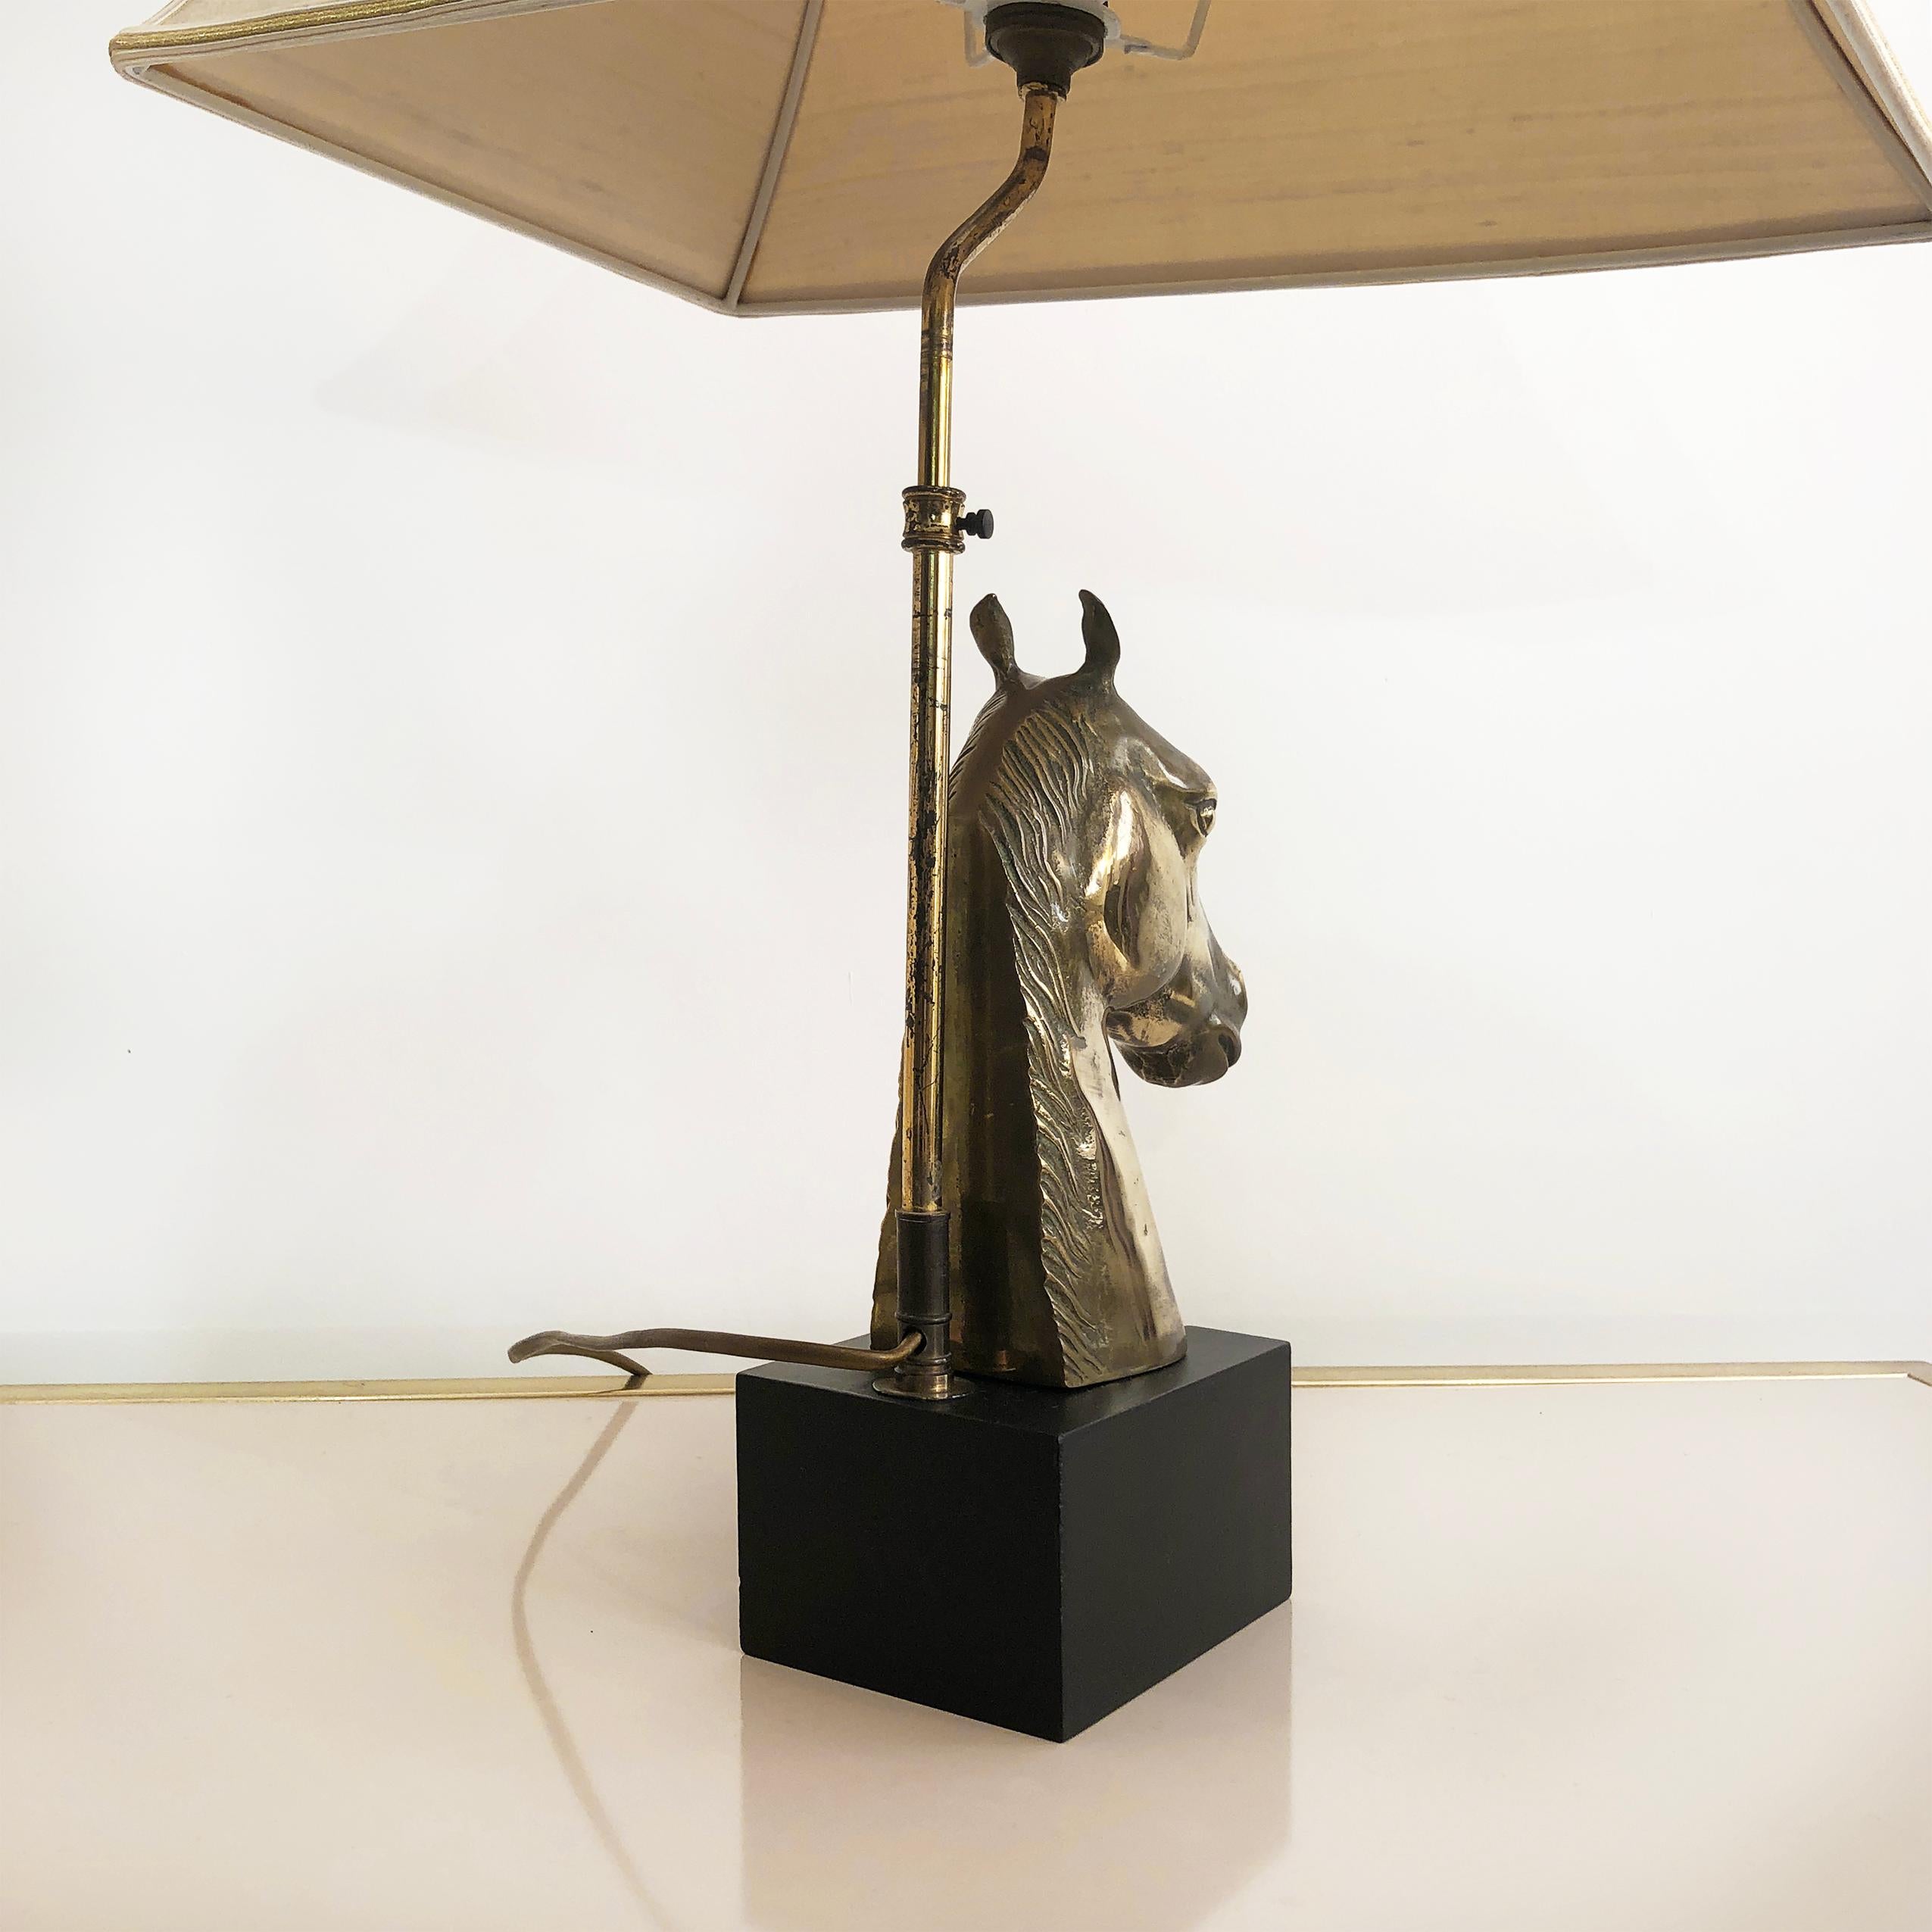 Brass Horse Chinoiserie Table Lamp 1970s Hollywood Regency Midcentury Antique For Sale 4